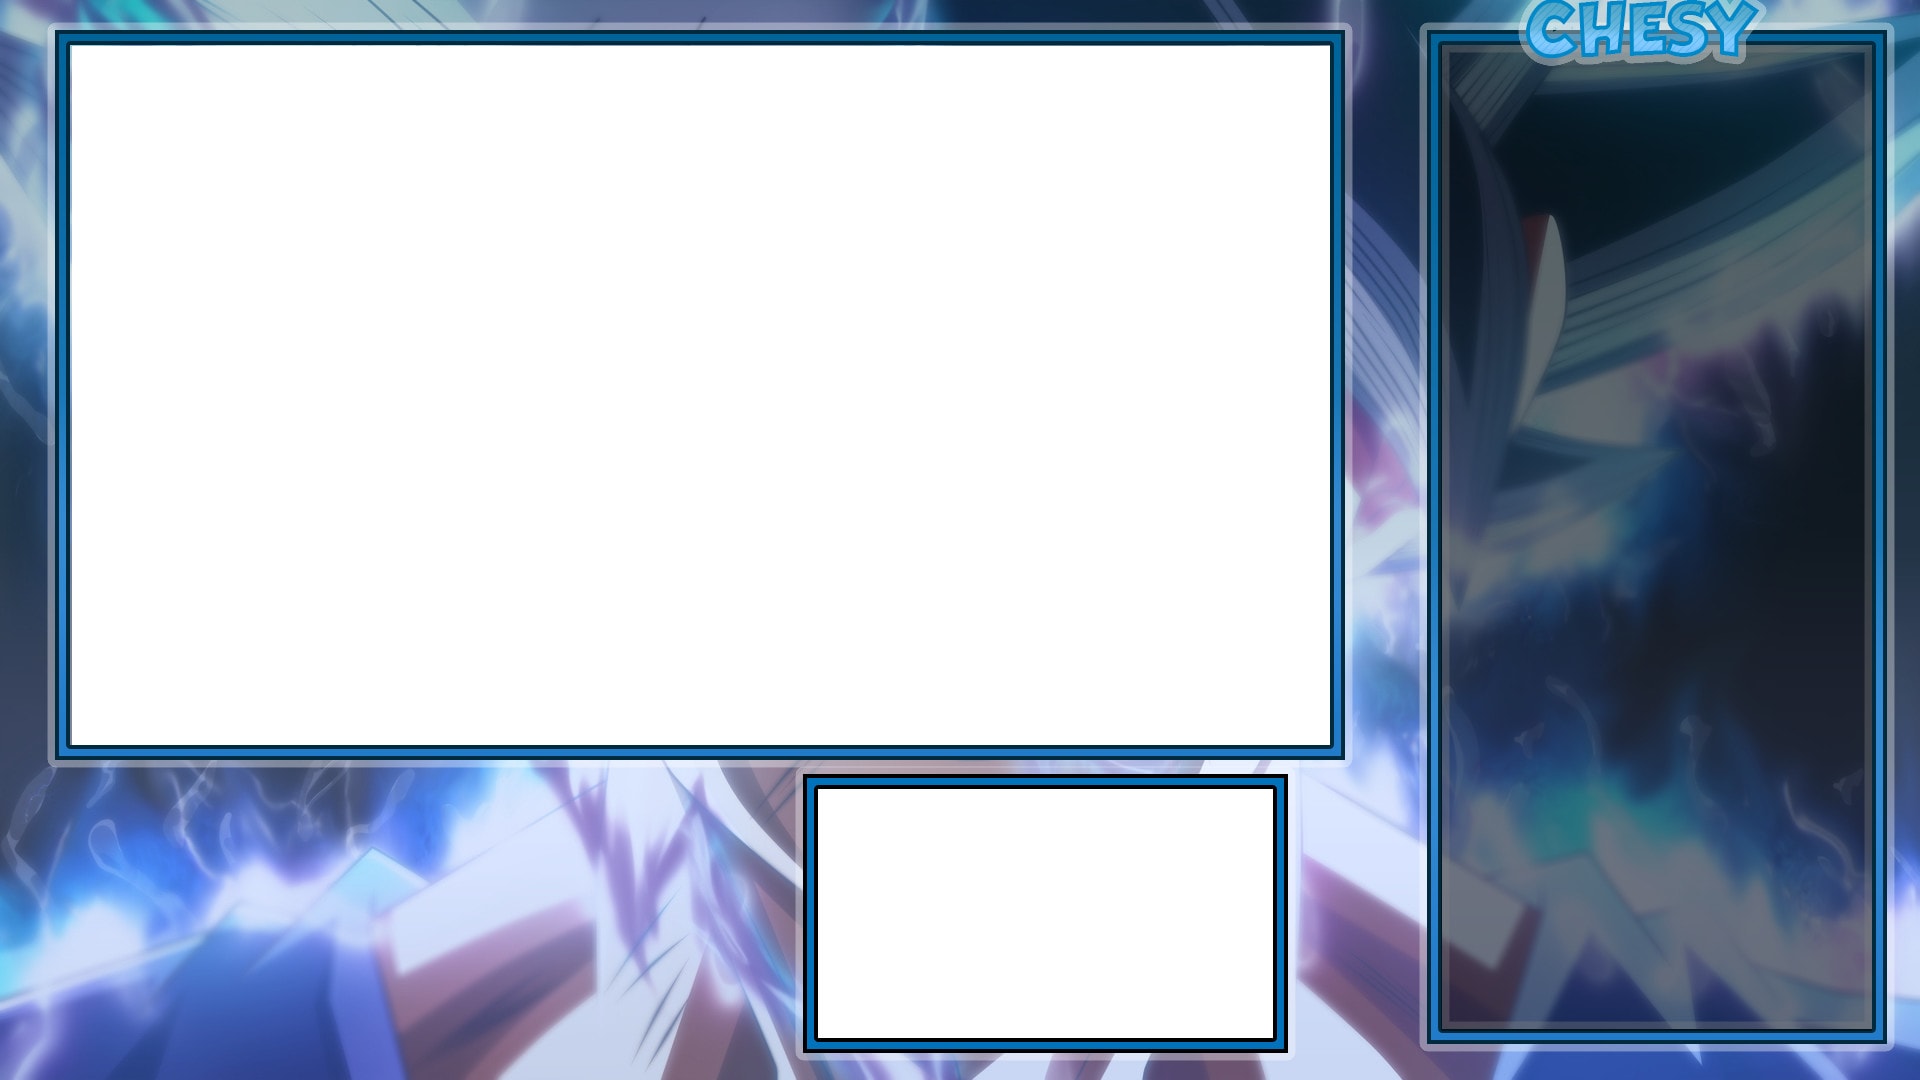 Make you a twitch anime stream overlay by Chesyz  Fiverr